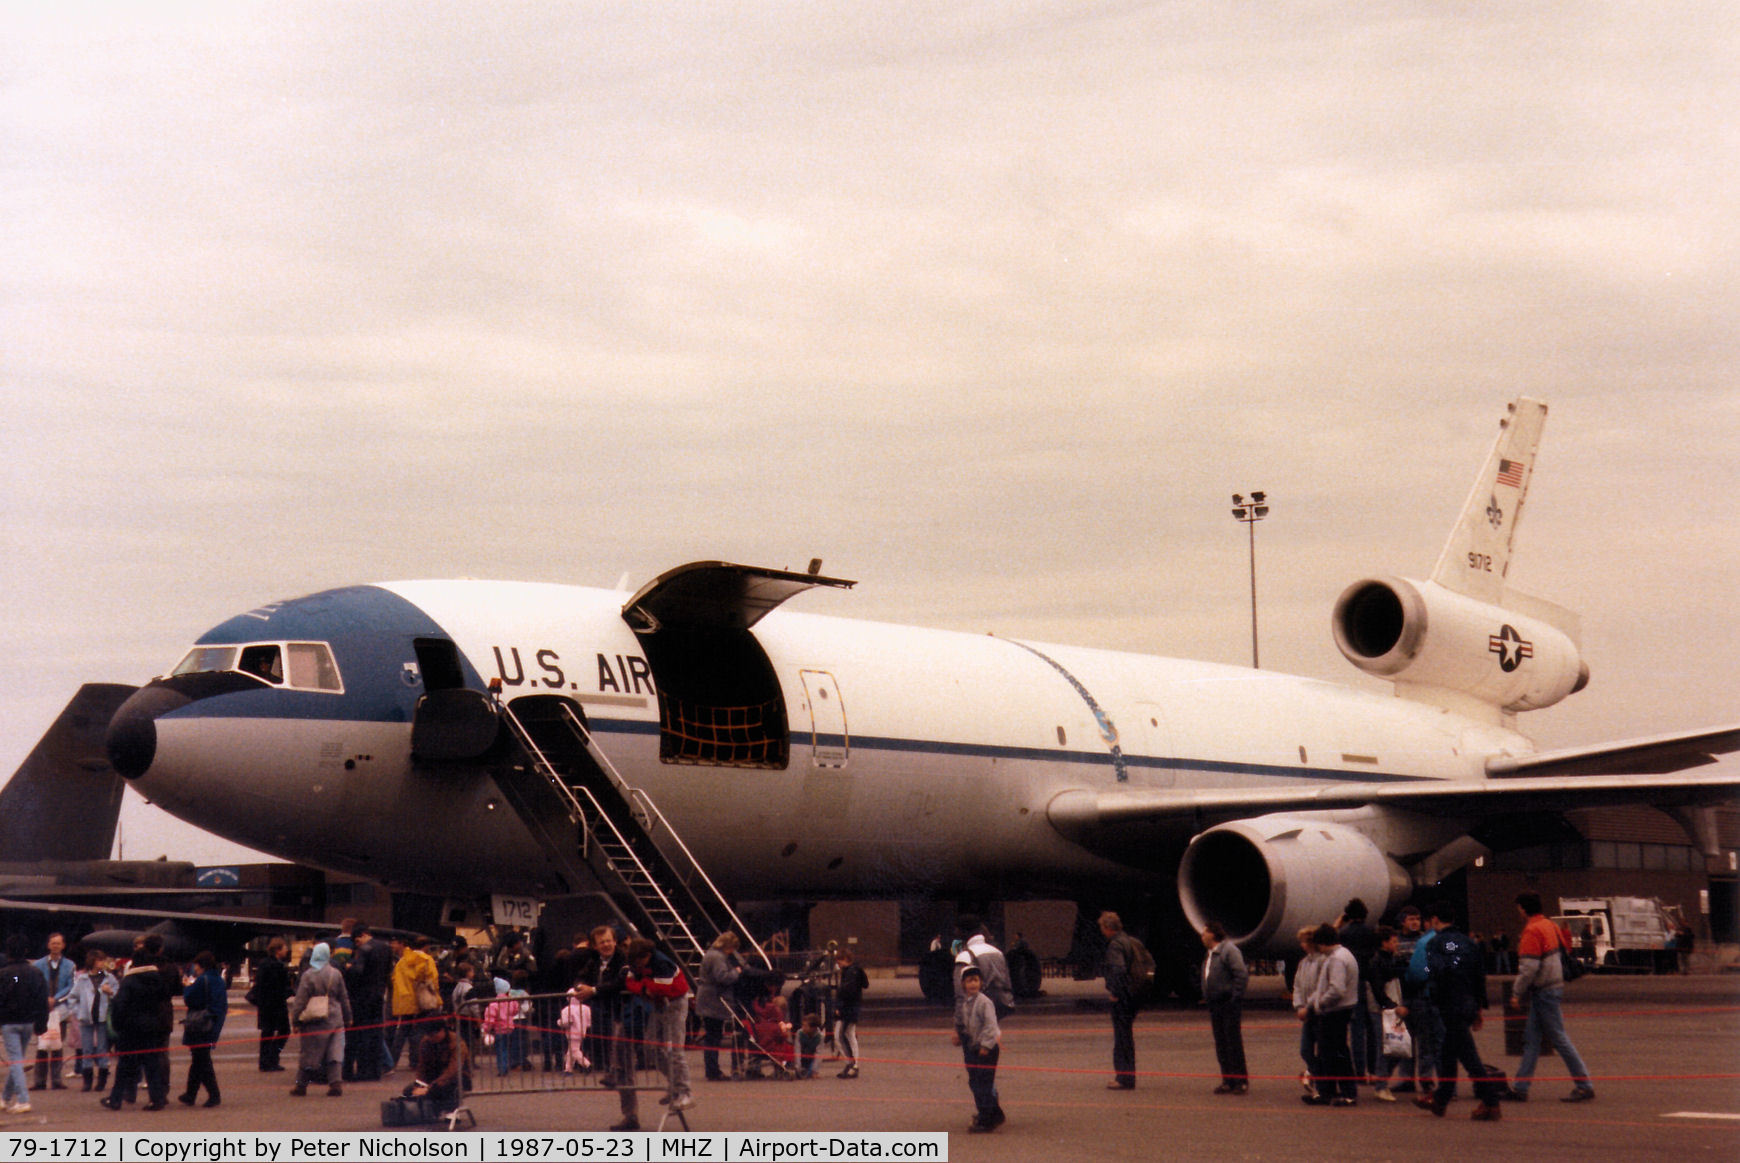 79-1712, 1981 McDonnell Douglas KC-10A Extender C/N 48204, KC-10A Extender of 32nd Air Refuelling Squadron/2nd Bomb Wing at Barksdale AFB on display at the 1987 RAF Mildenhall Air Fete.